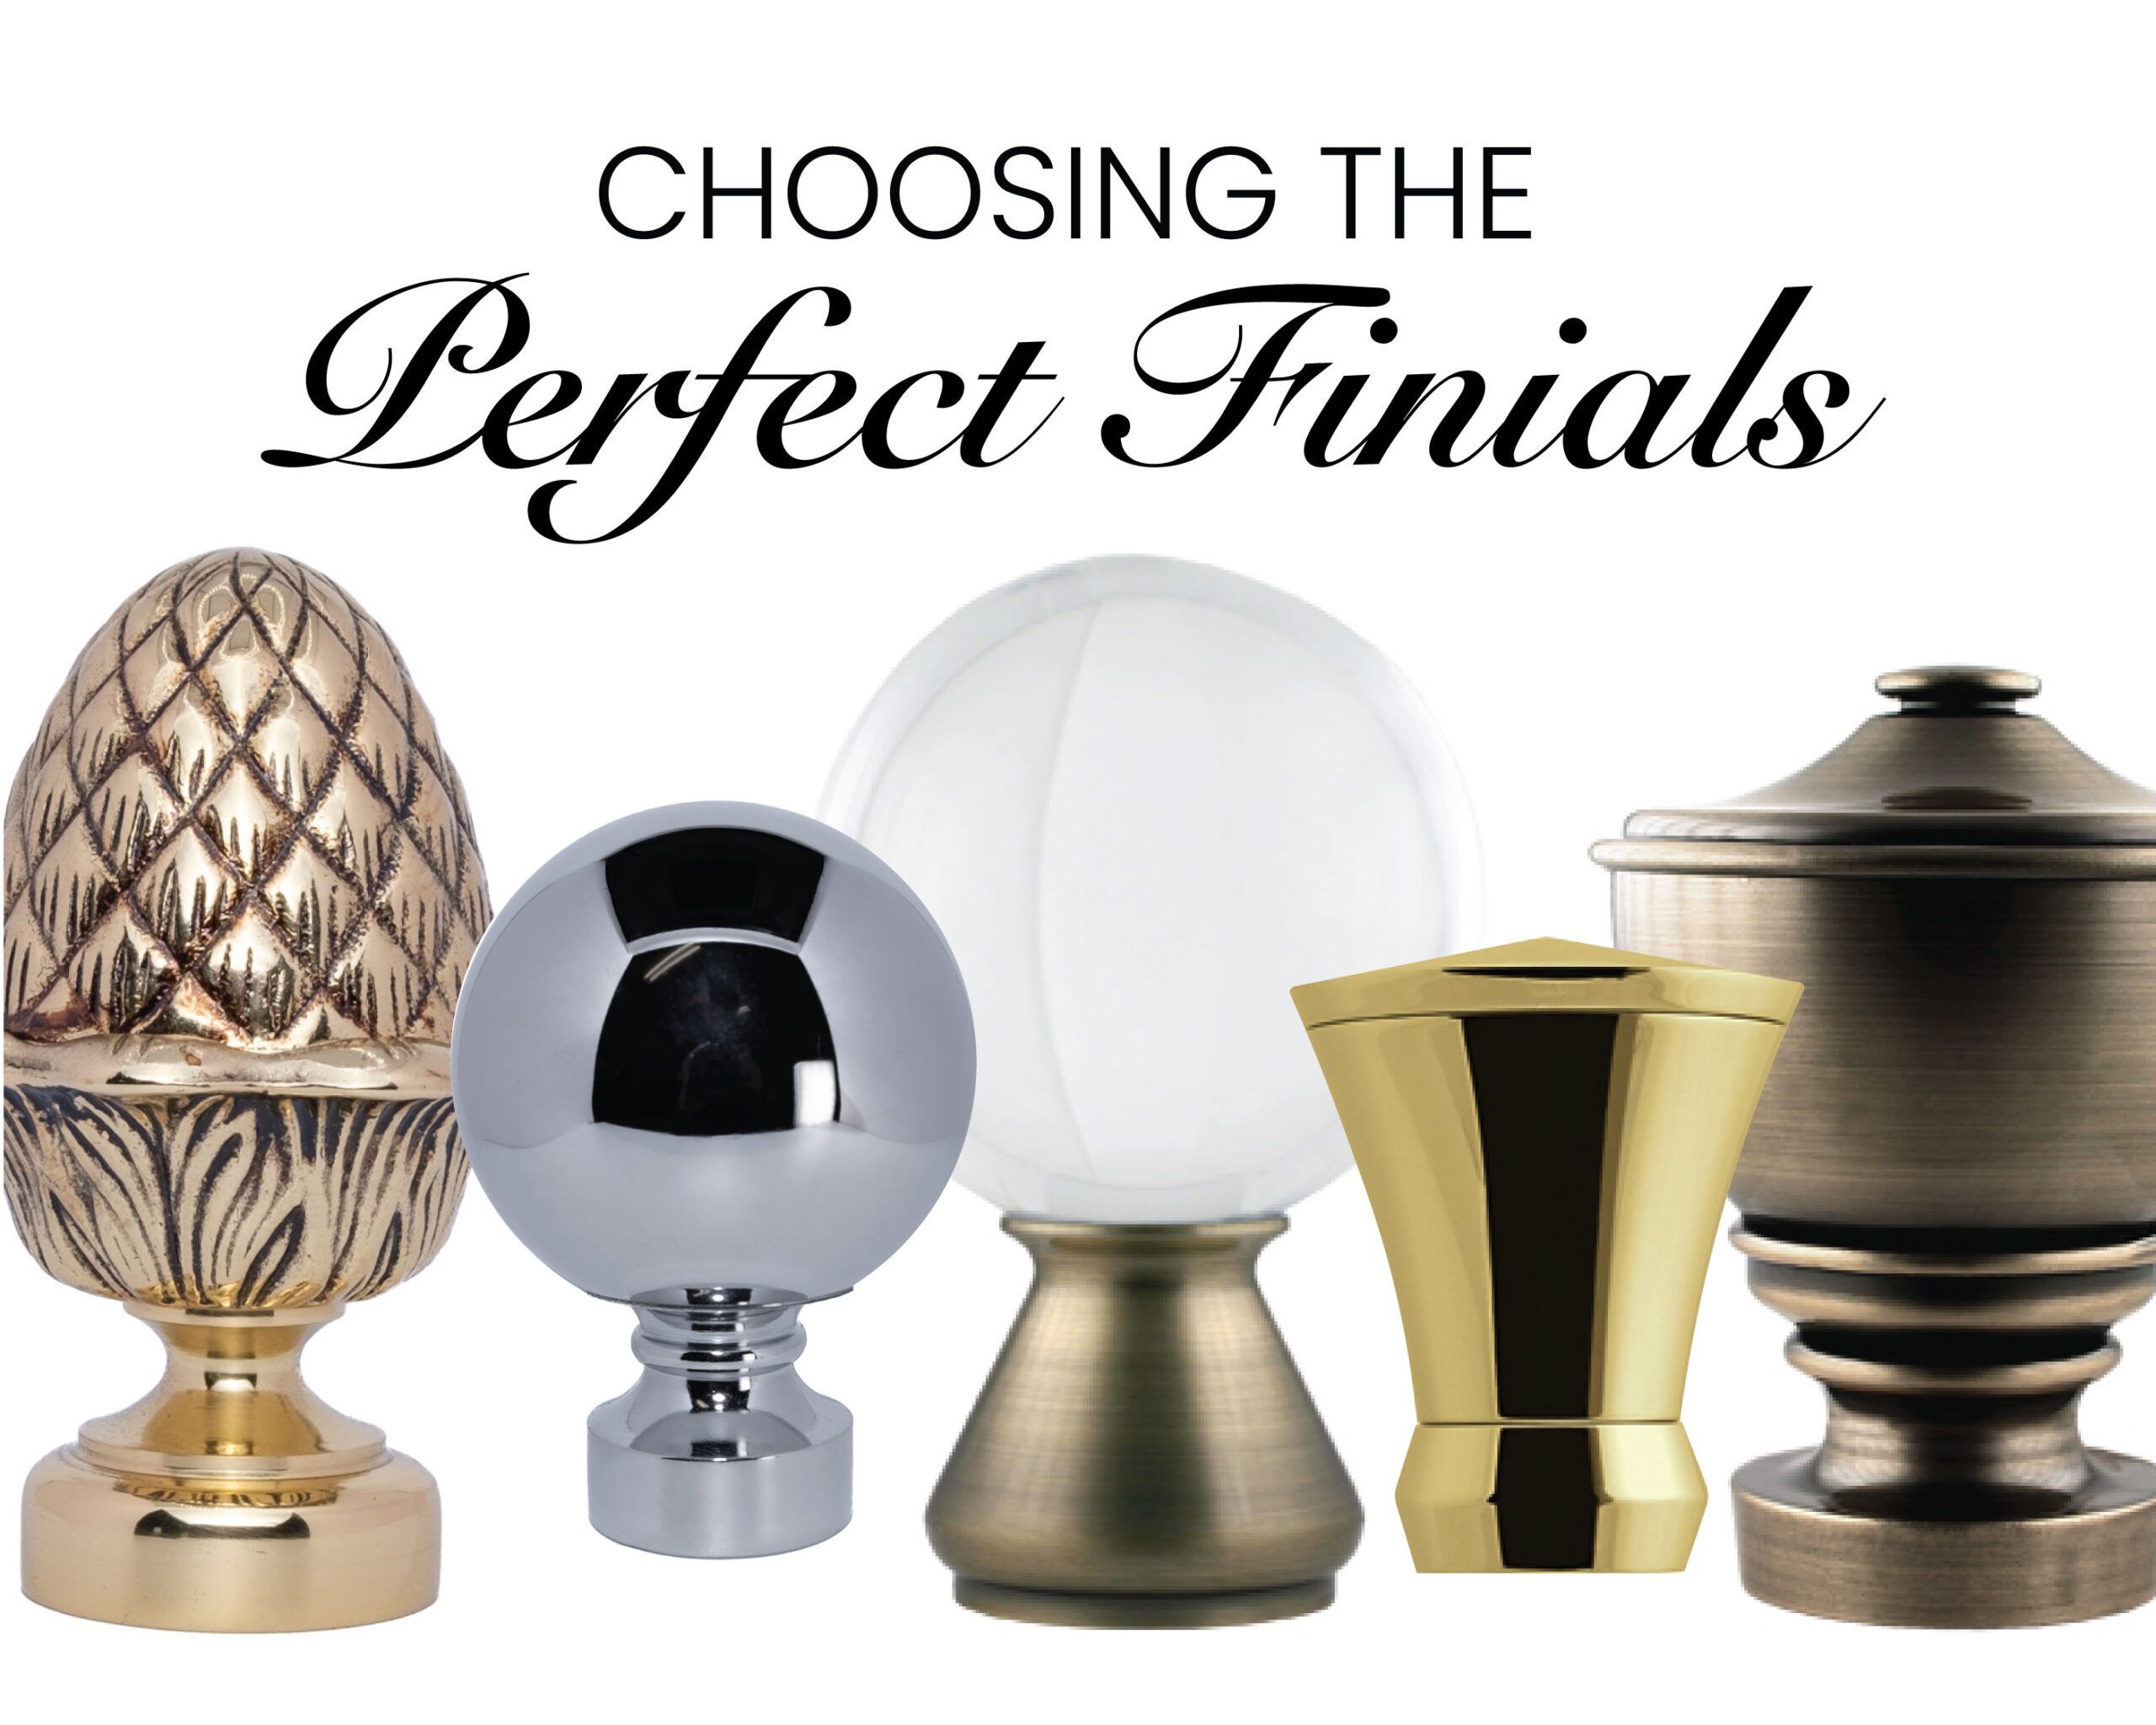 Various finials from Vesta lined up on white background with the title "Choosing the Perfect Finials" above it.